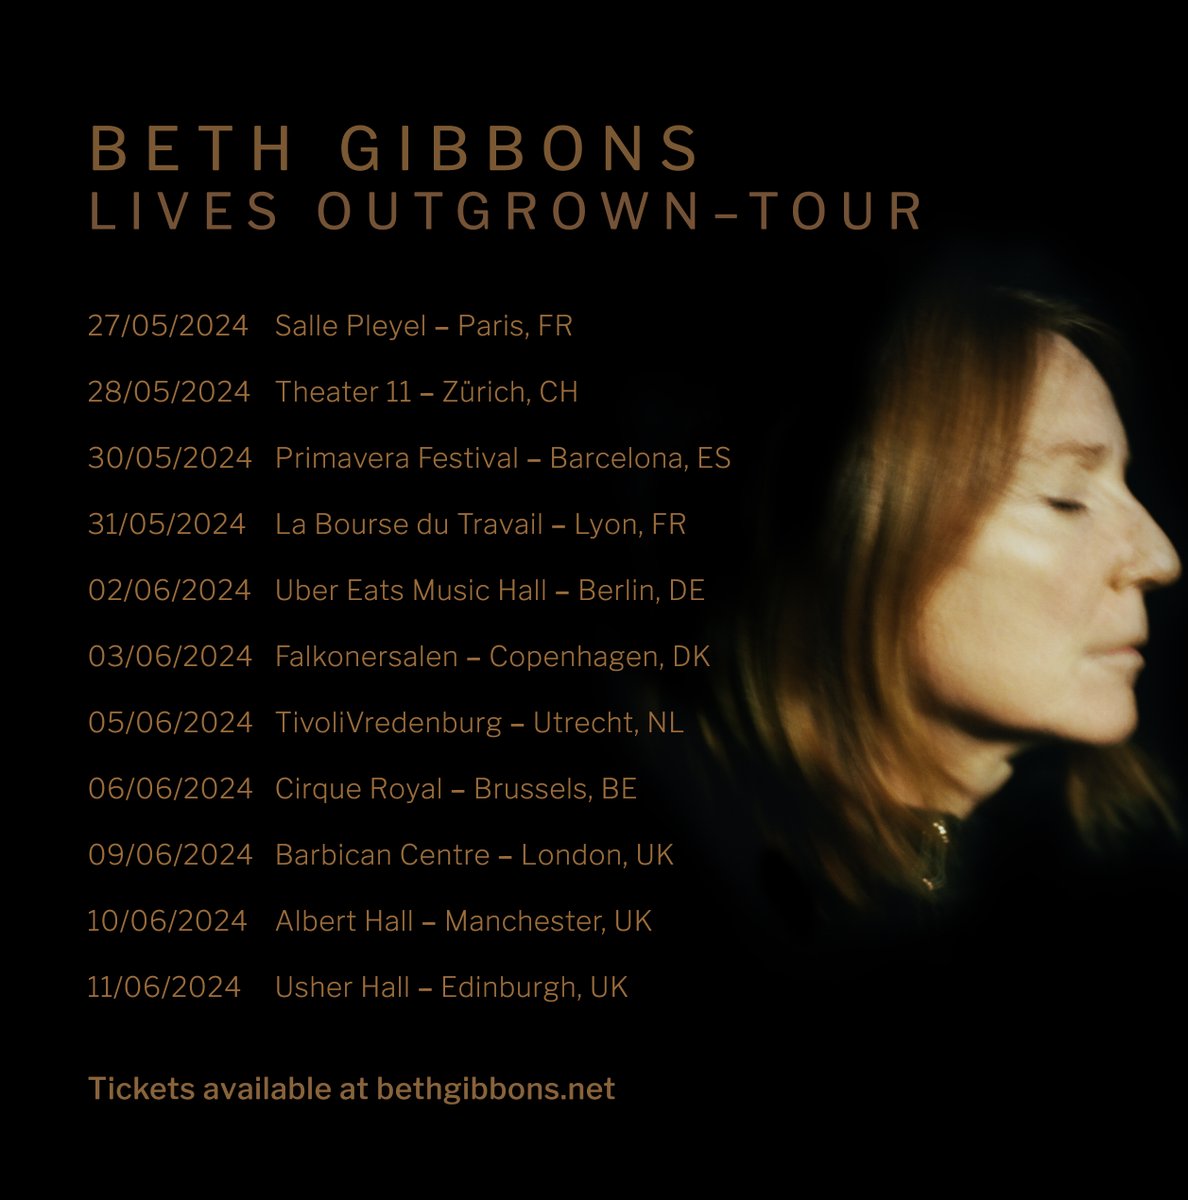 Lives Outgrown tickets on sale now bethgibbons.net